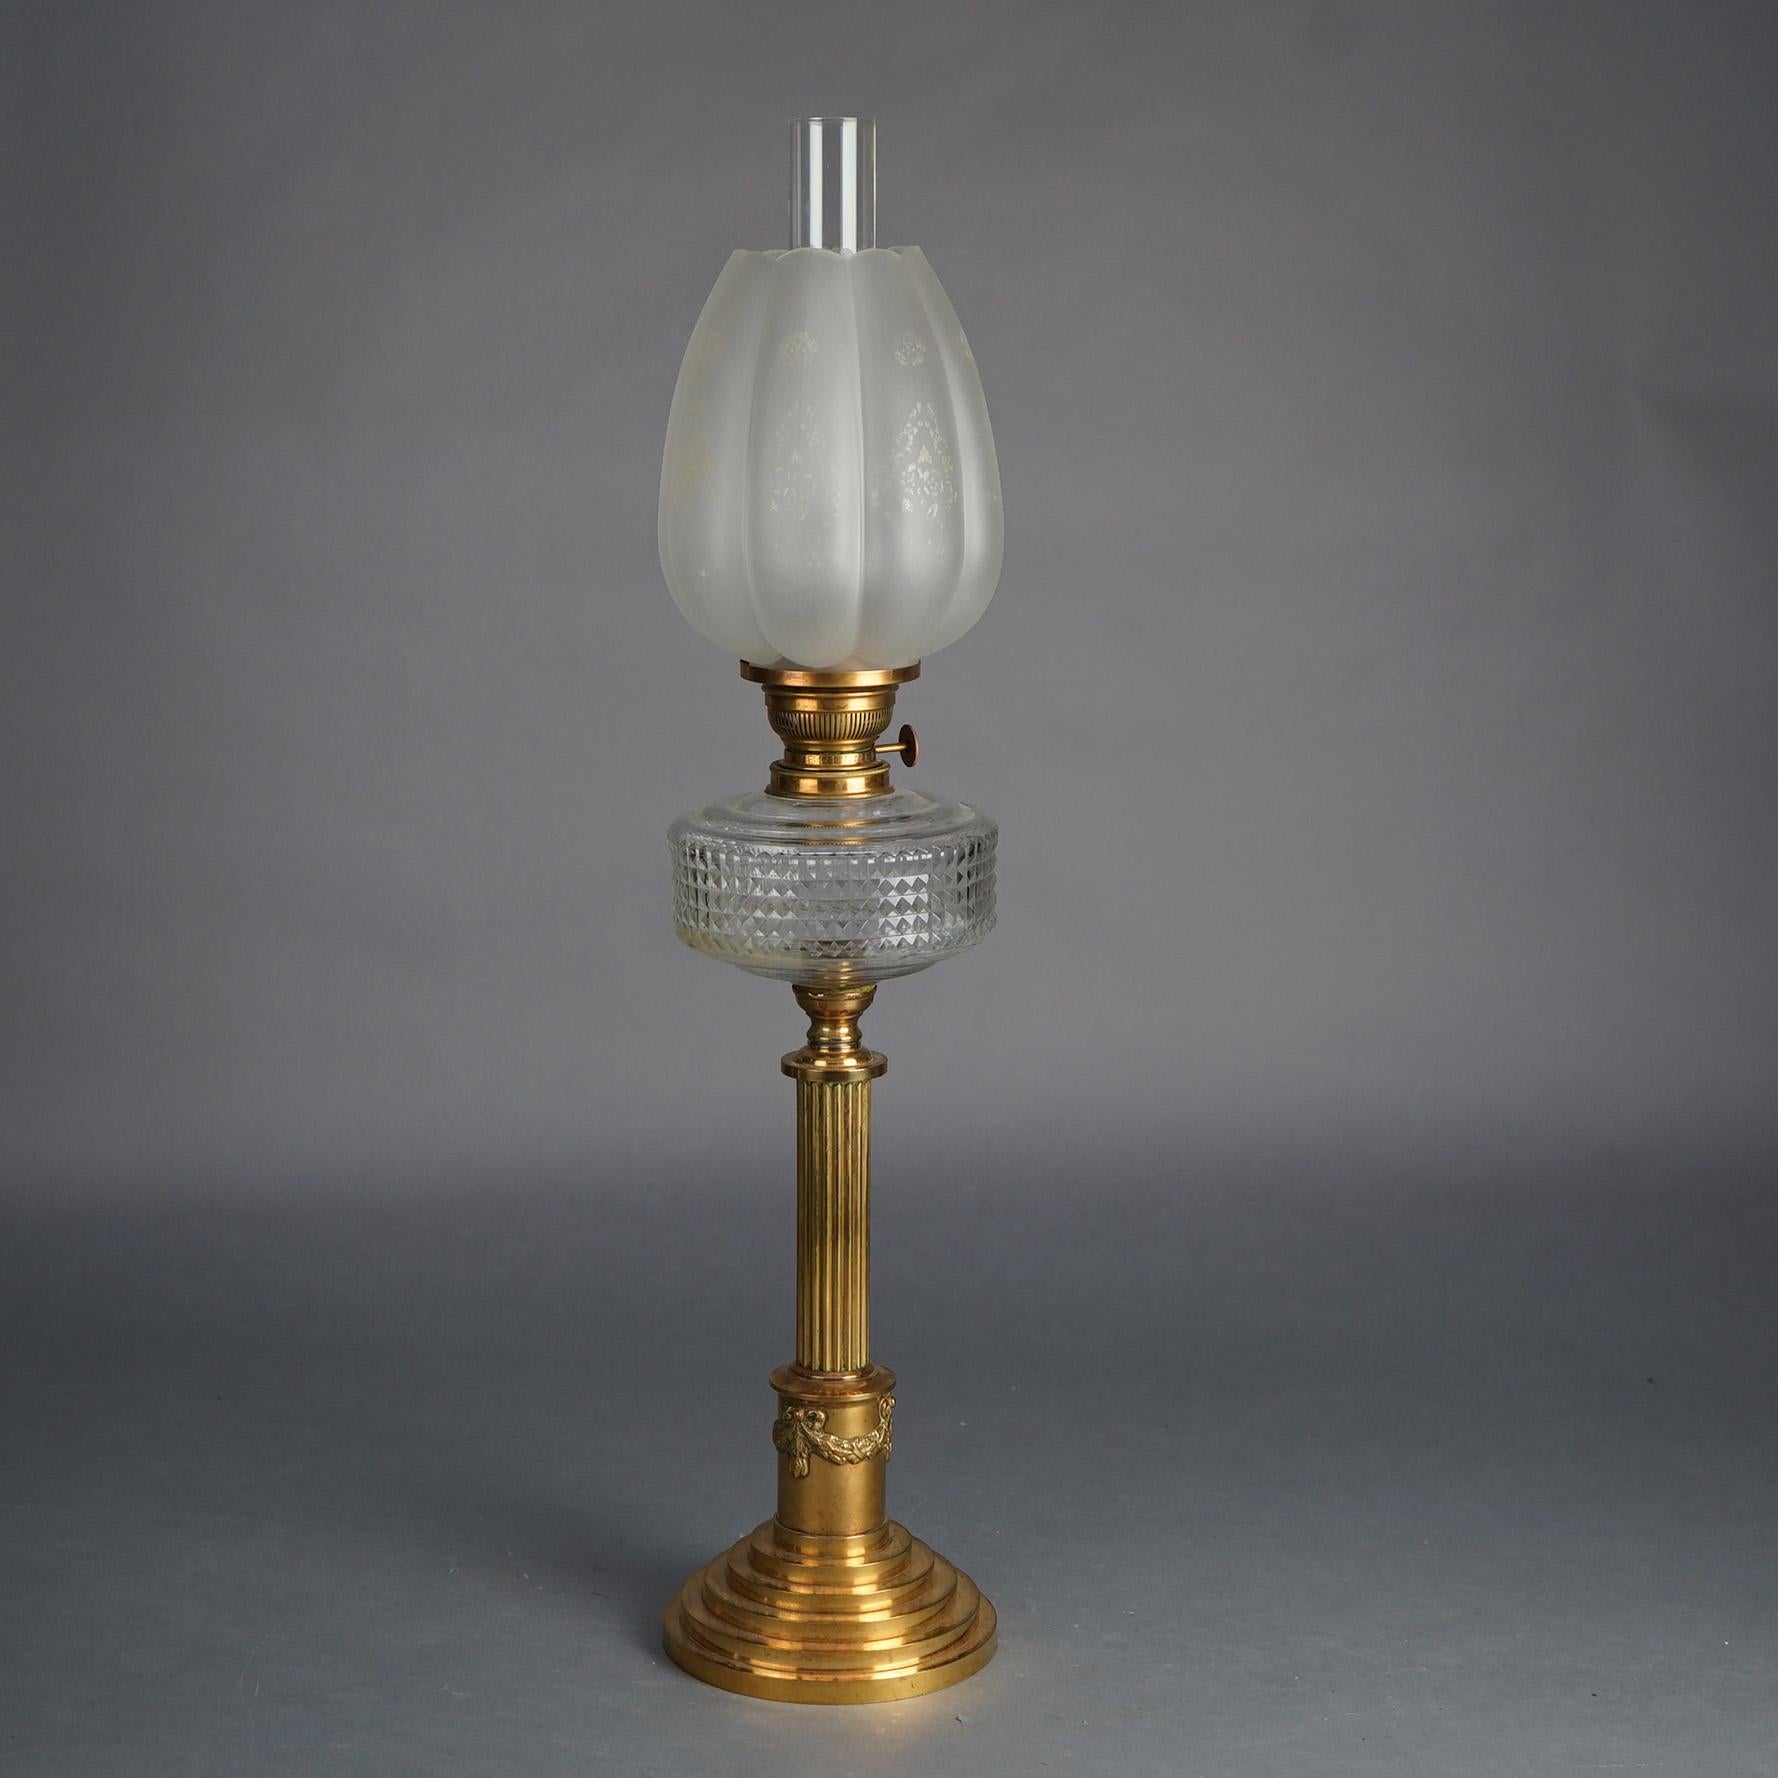 Antique Neoclassical Bronze Oil Lamp with Fluted & Flared Base, Pressed Glass Font and Floral Ripple Glass Shade C1890

Measures- 30''H x 6.75''W x 6.75''D